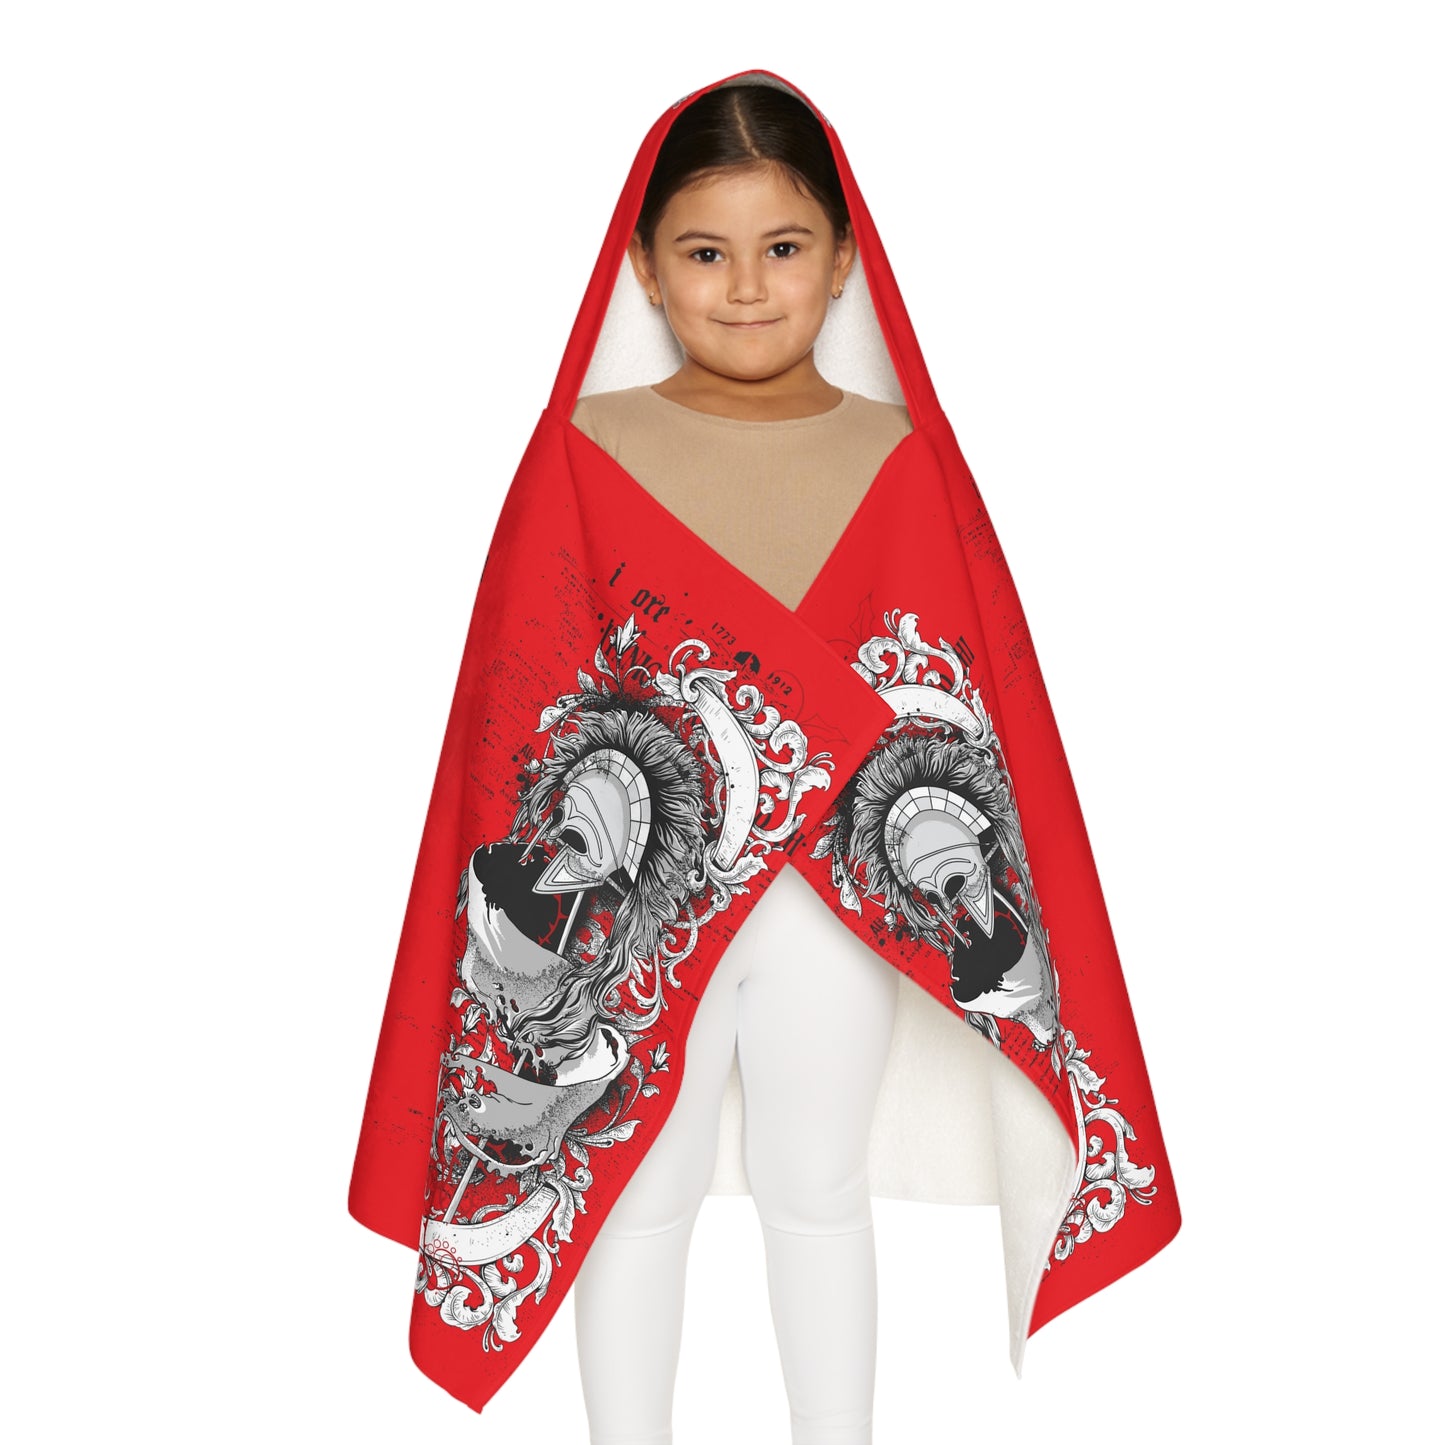 Youth Hooded Centurion Towel (Red)